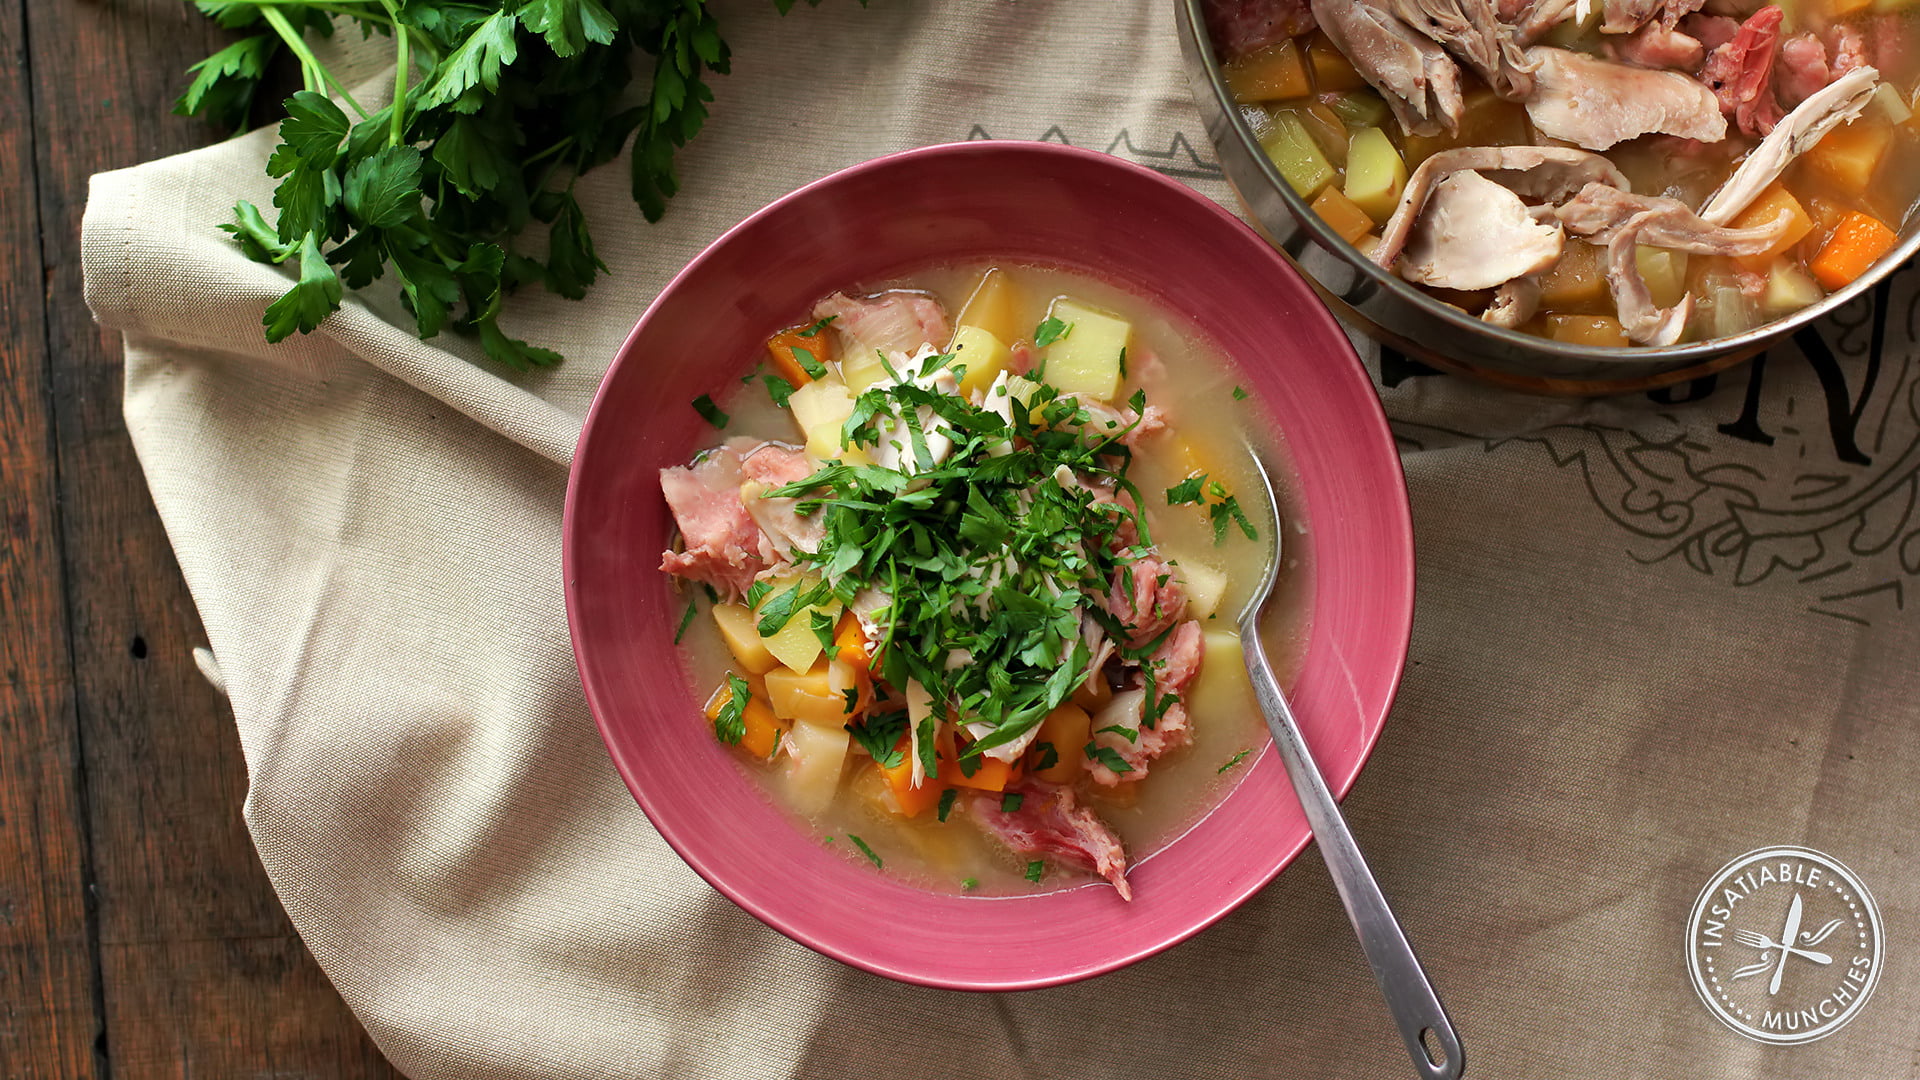 Man soup: made with ham hock meat, root vegetables, chicken and lemon